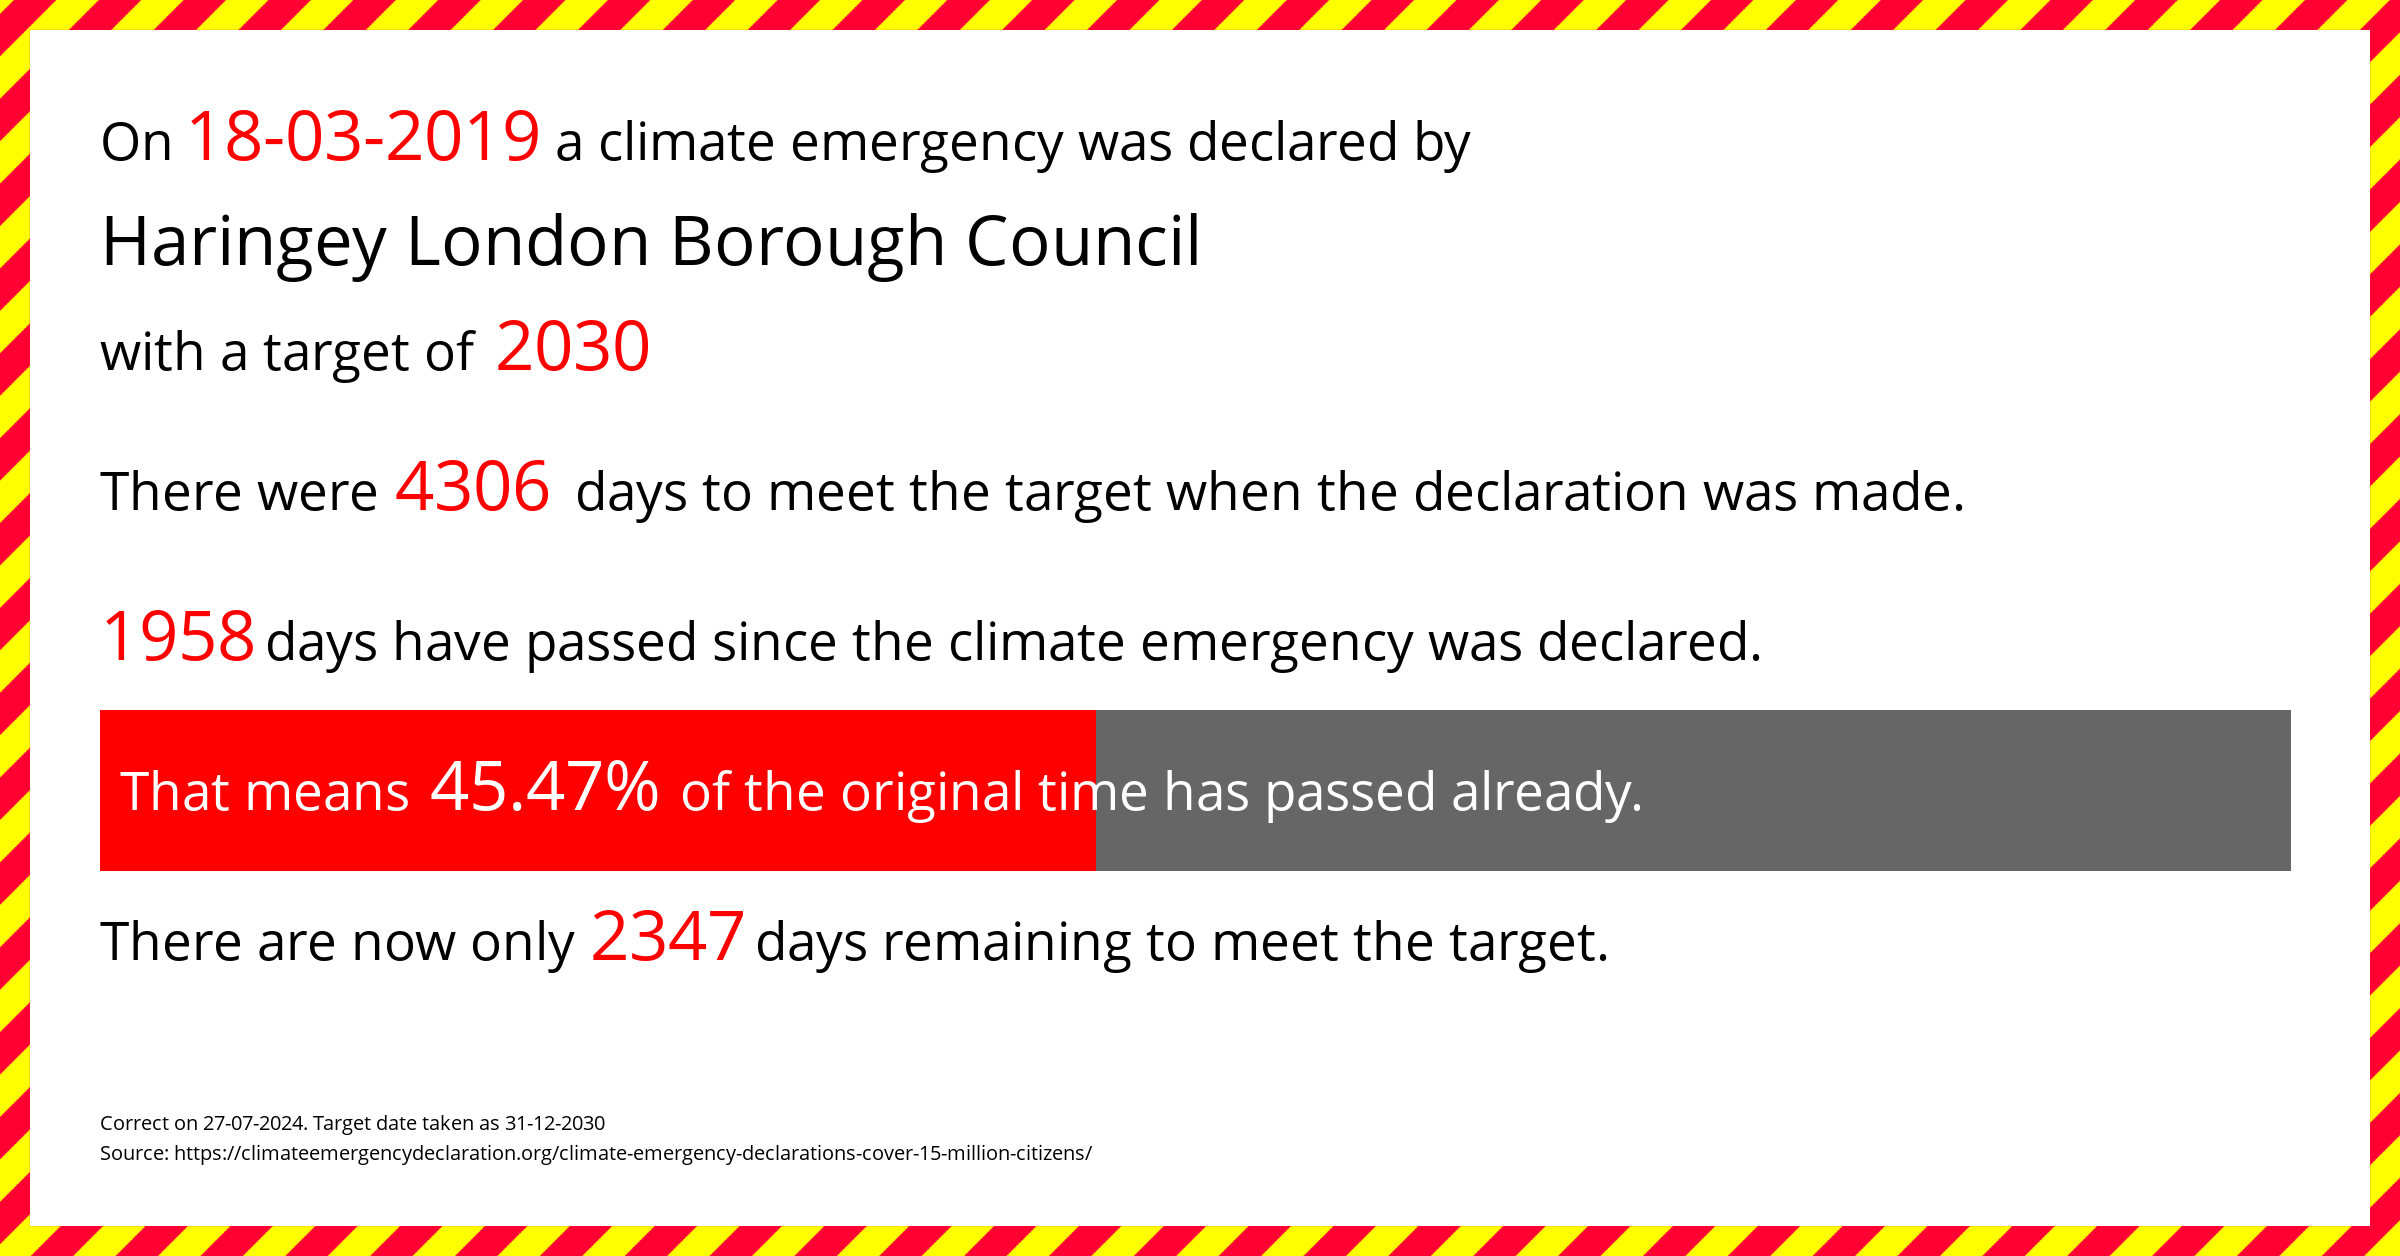 Haringey London Borough Council declared a Climate emergency on Monday 18th March 2019, with a target of 2030.